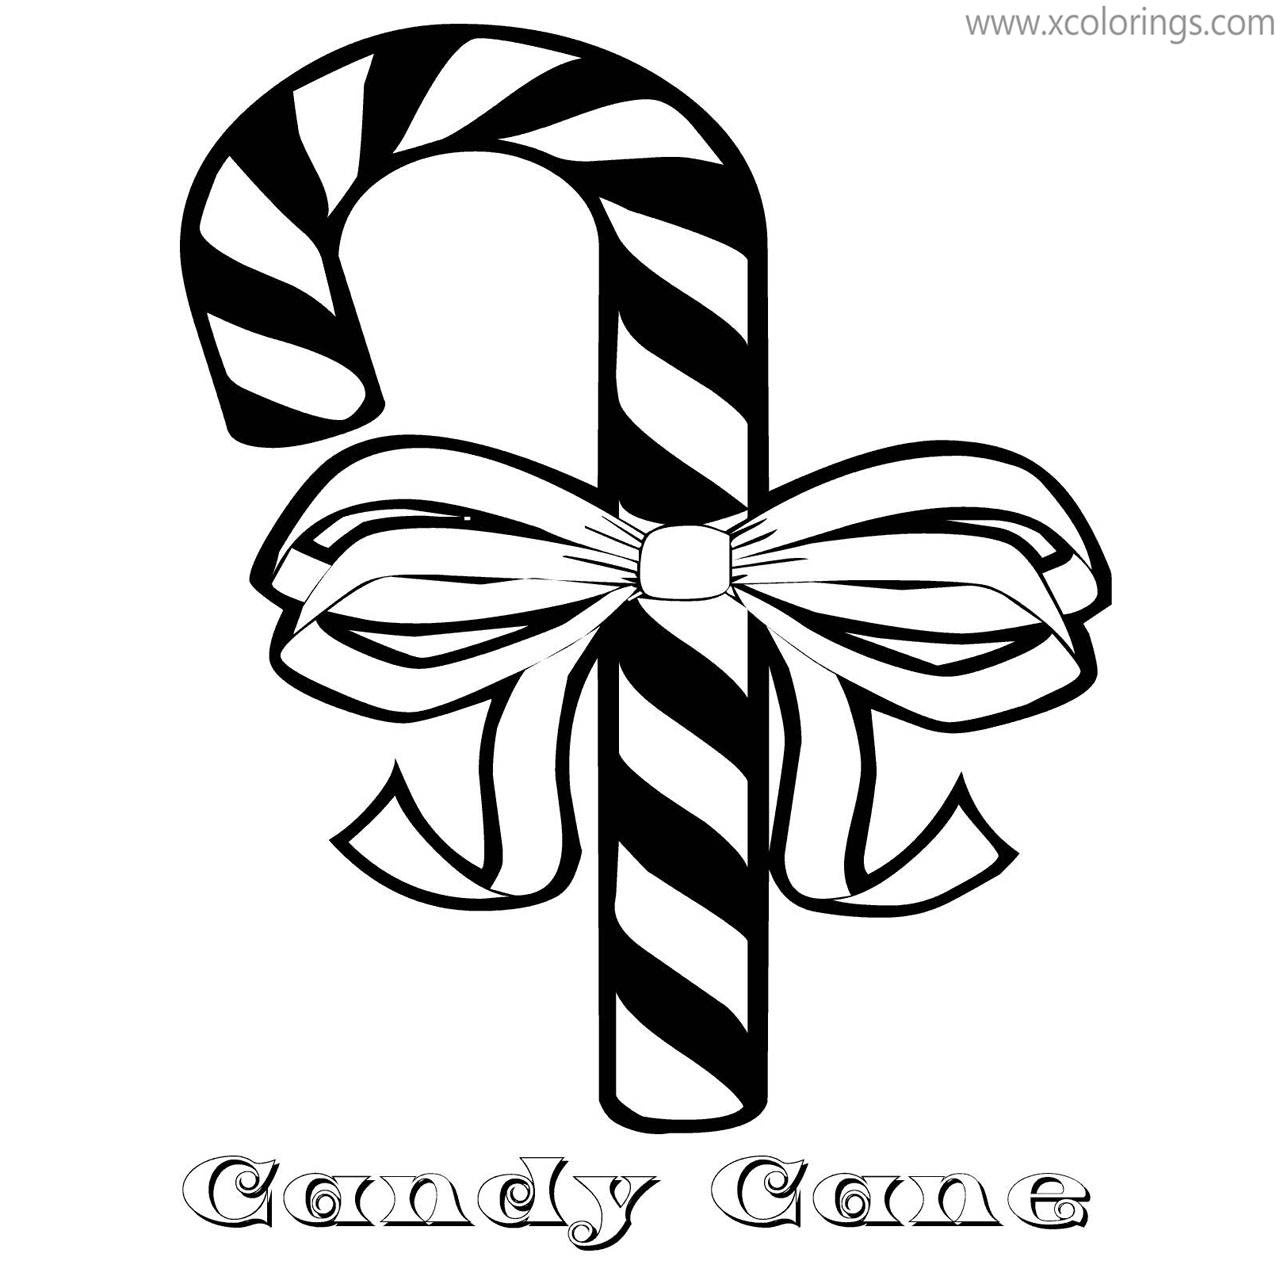 Free Candy Cane Coloring Sheets for Christmas printable